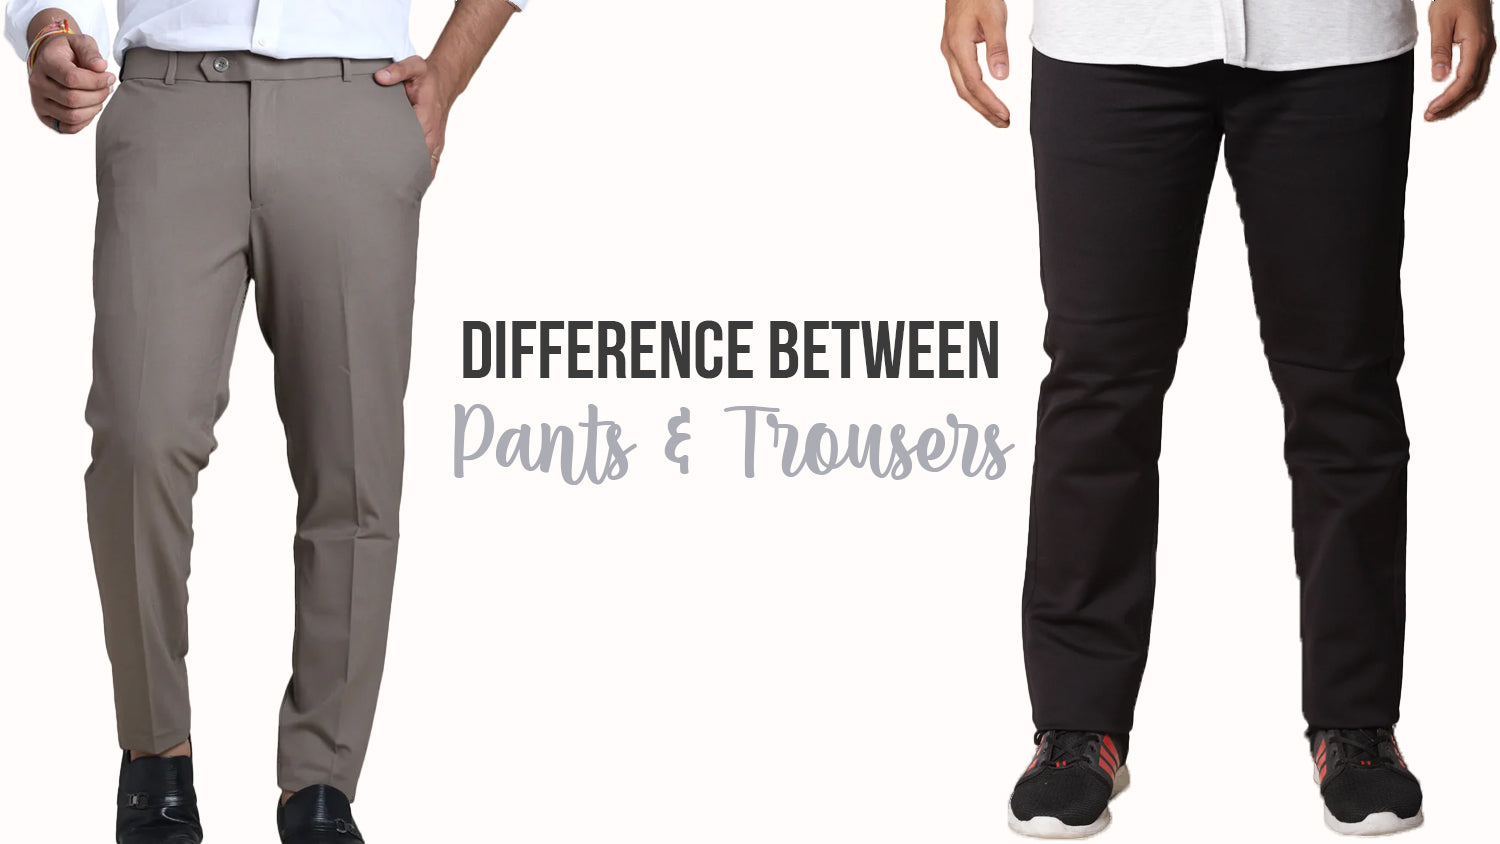 Are chinos pants a fabric or a cut? - Quora